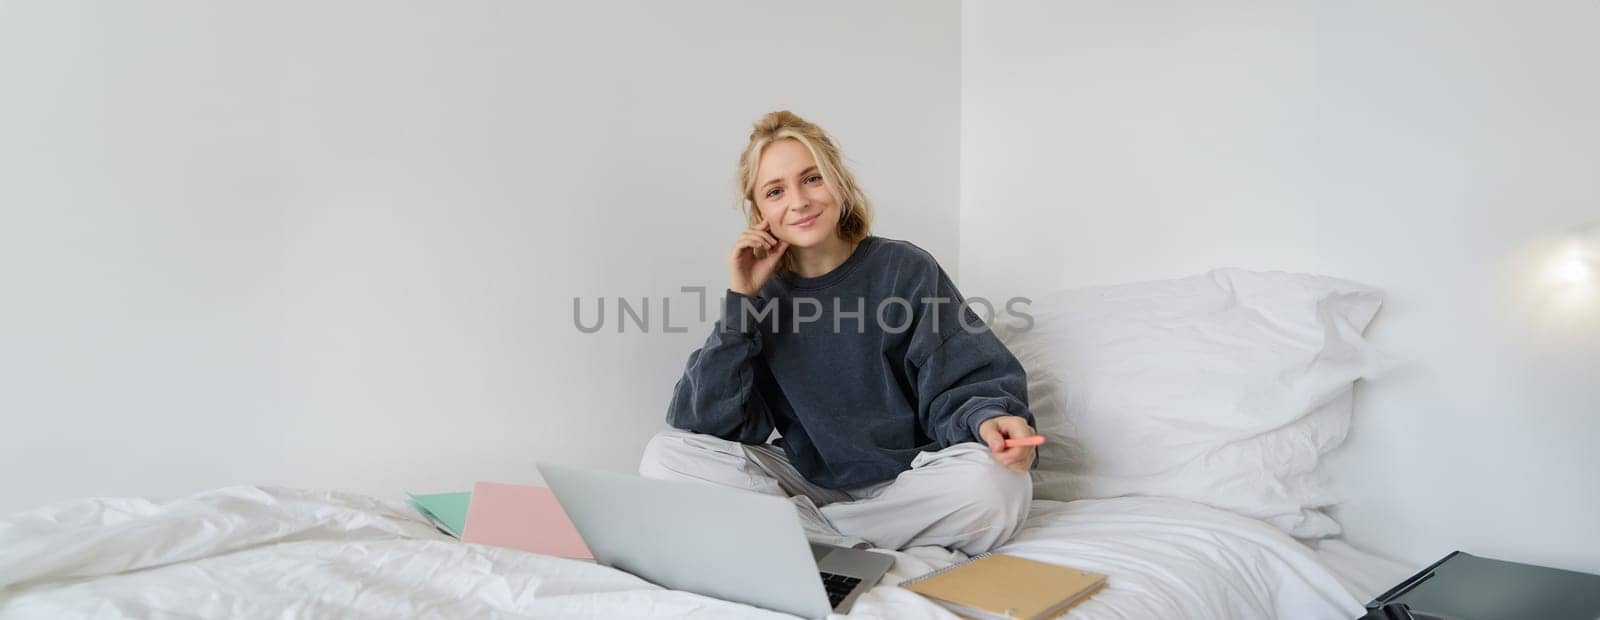 Portrait of young woman working from home, sitting on a bed with notebooks, documents and laptop, looking happy and smiling at camera.